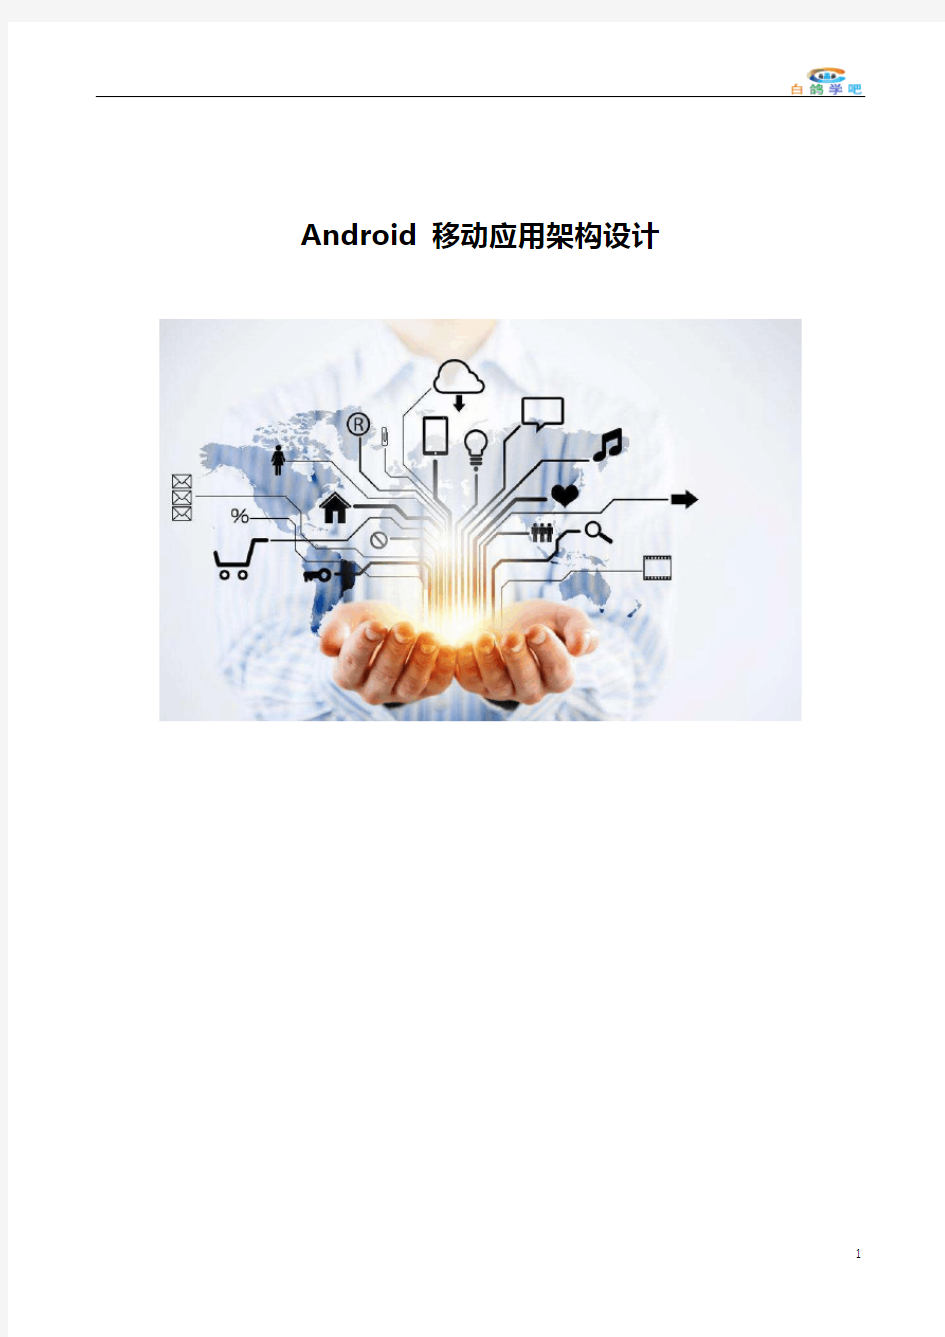 Android移动应用架构设计